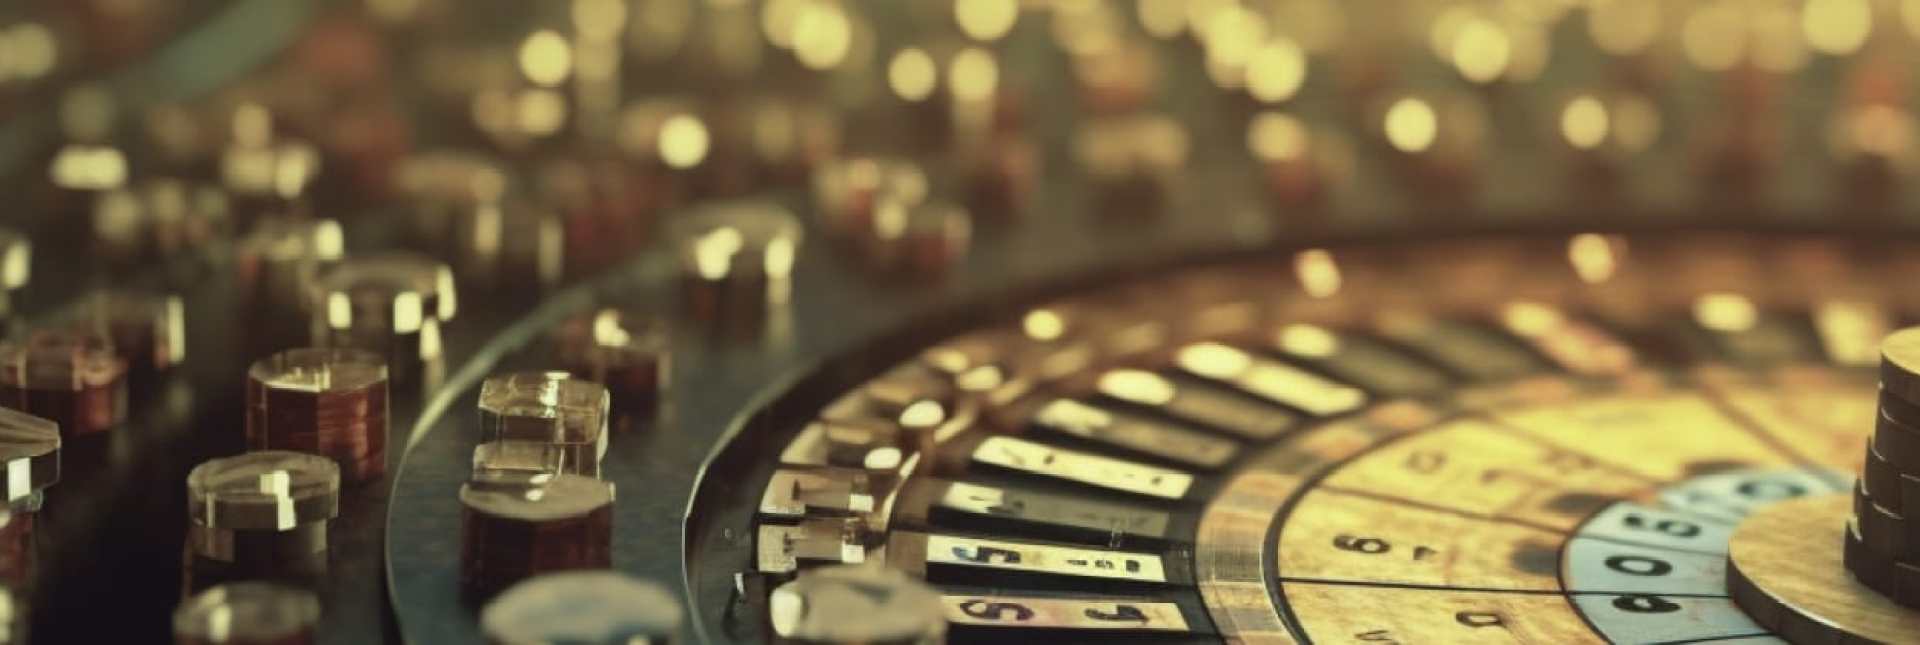 Bitcoin roulette free spins